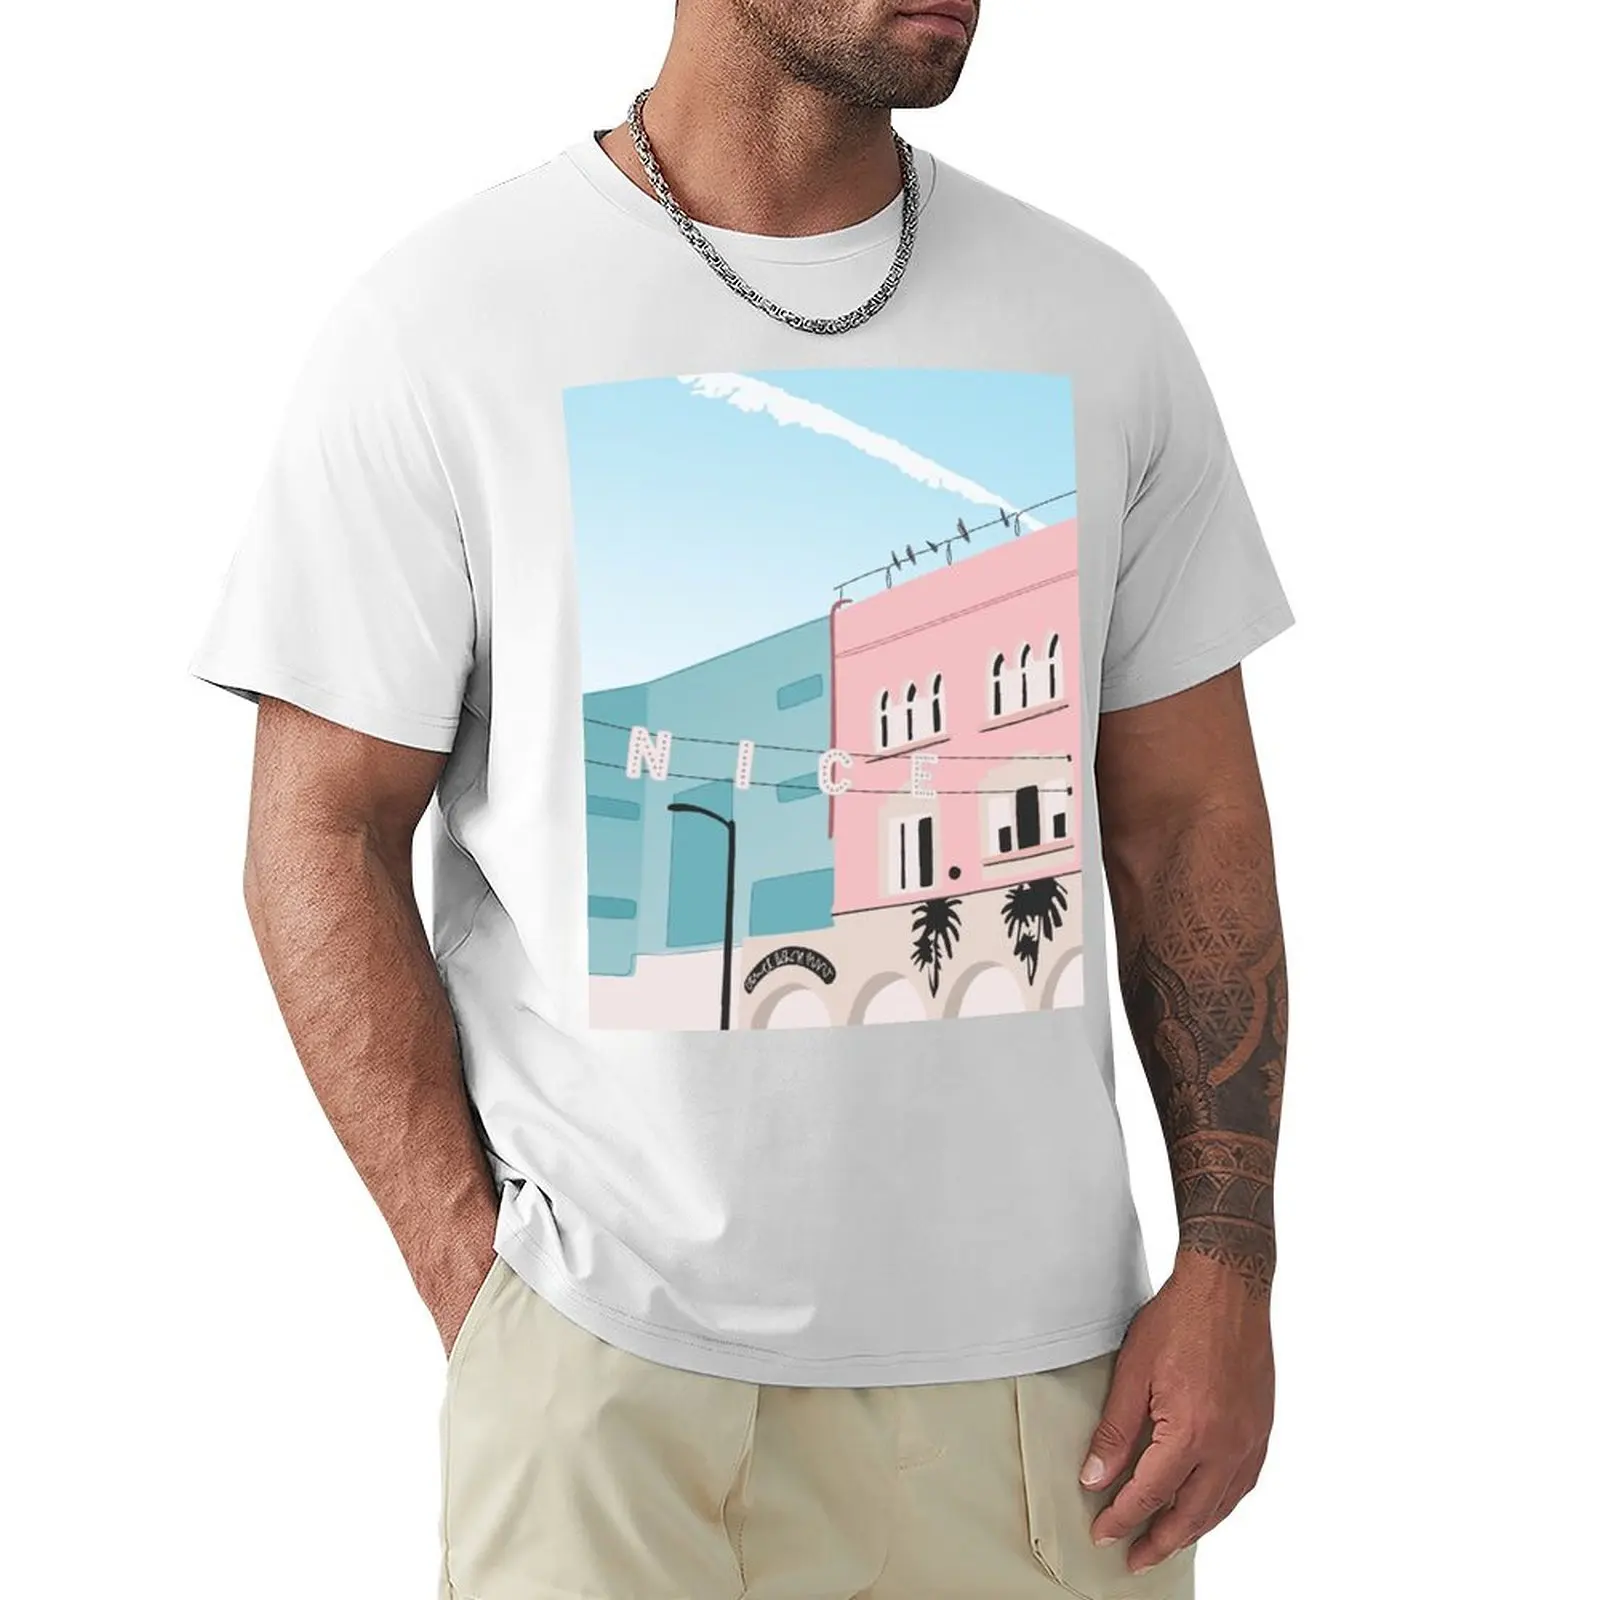 

Venice T-Shirt customizeds quick-drying sports fans Aesthetic clothing t shirts for men